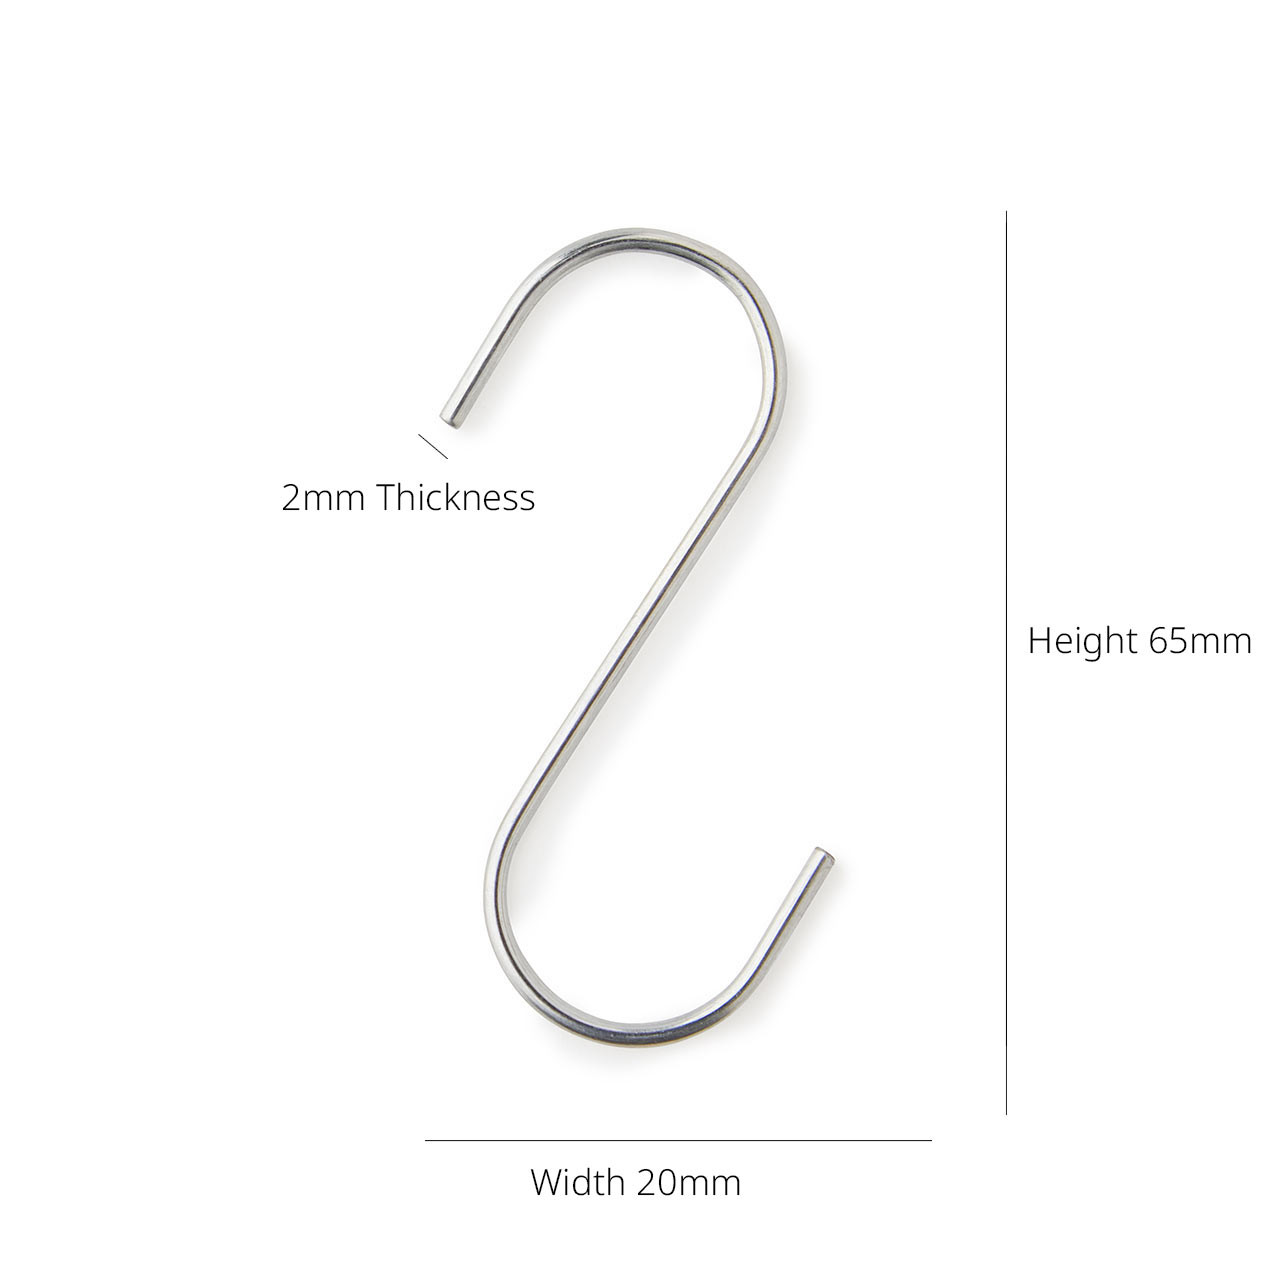 Pack of 100 x Large Silver S-Hooks